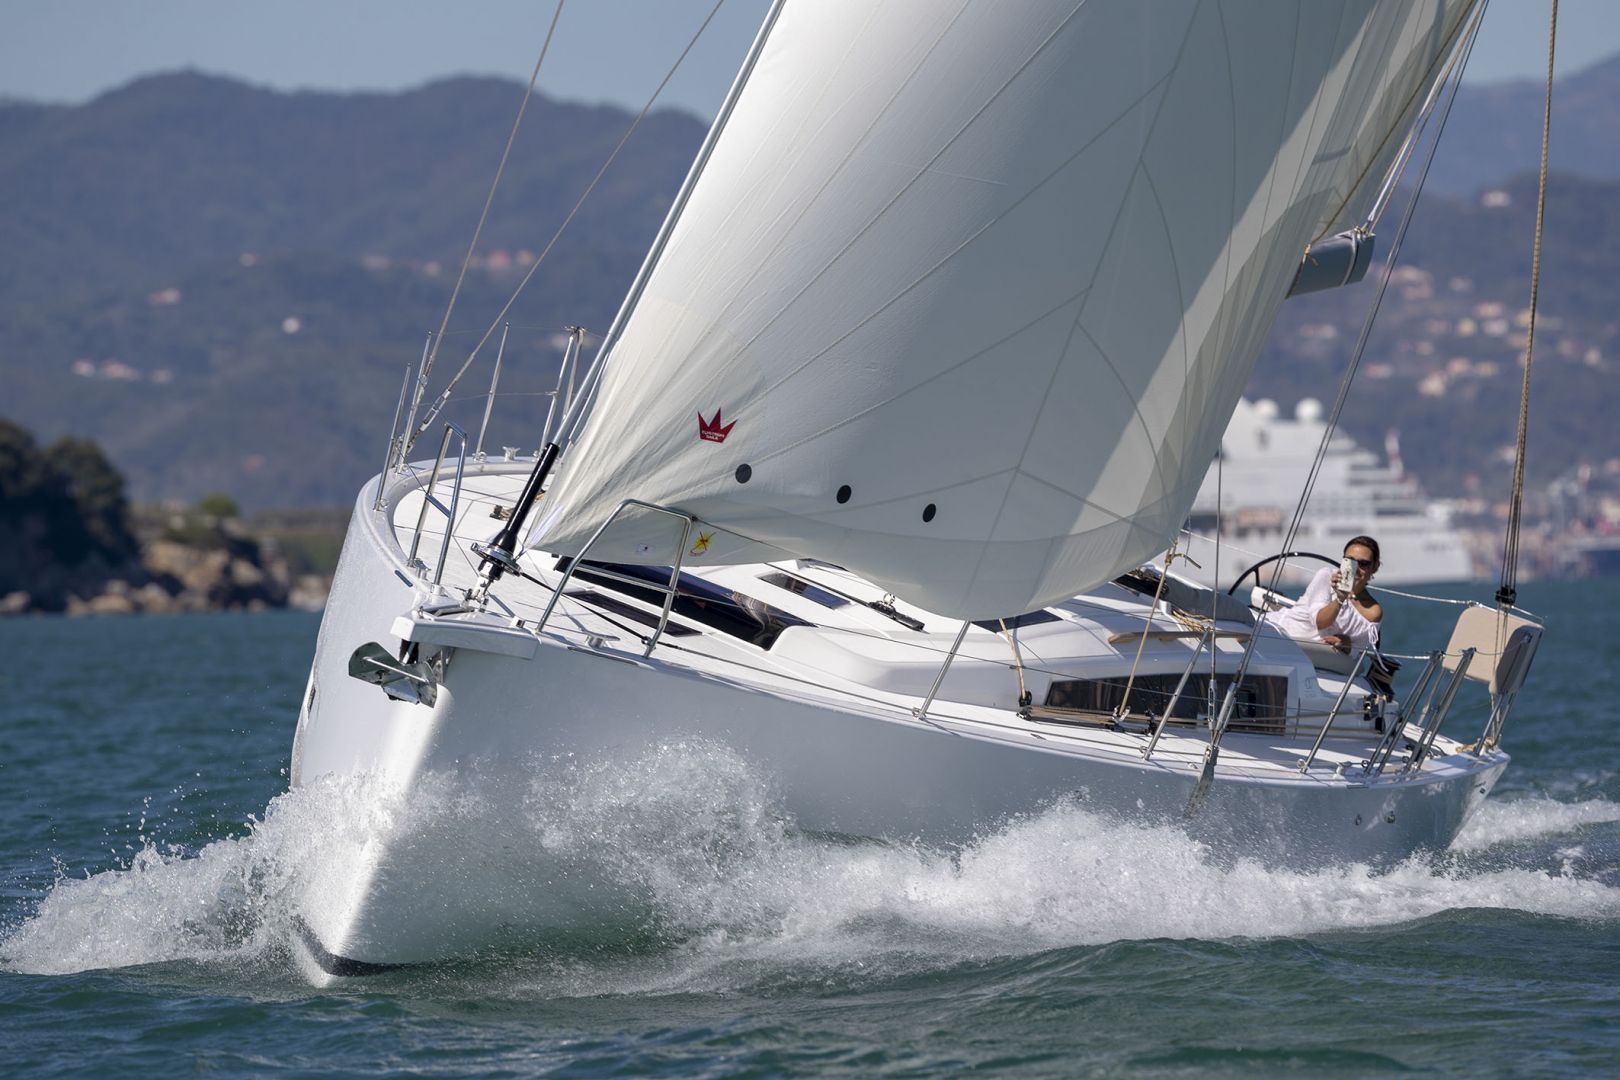 Dufour 430 – OWN IT TODAY!